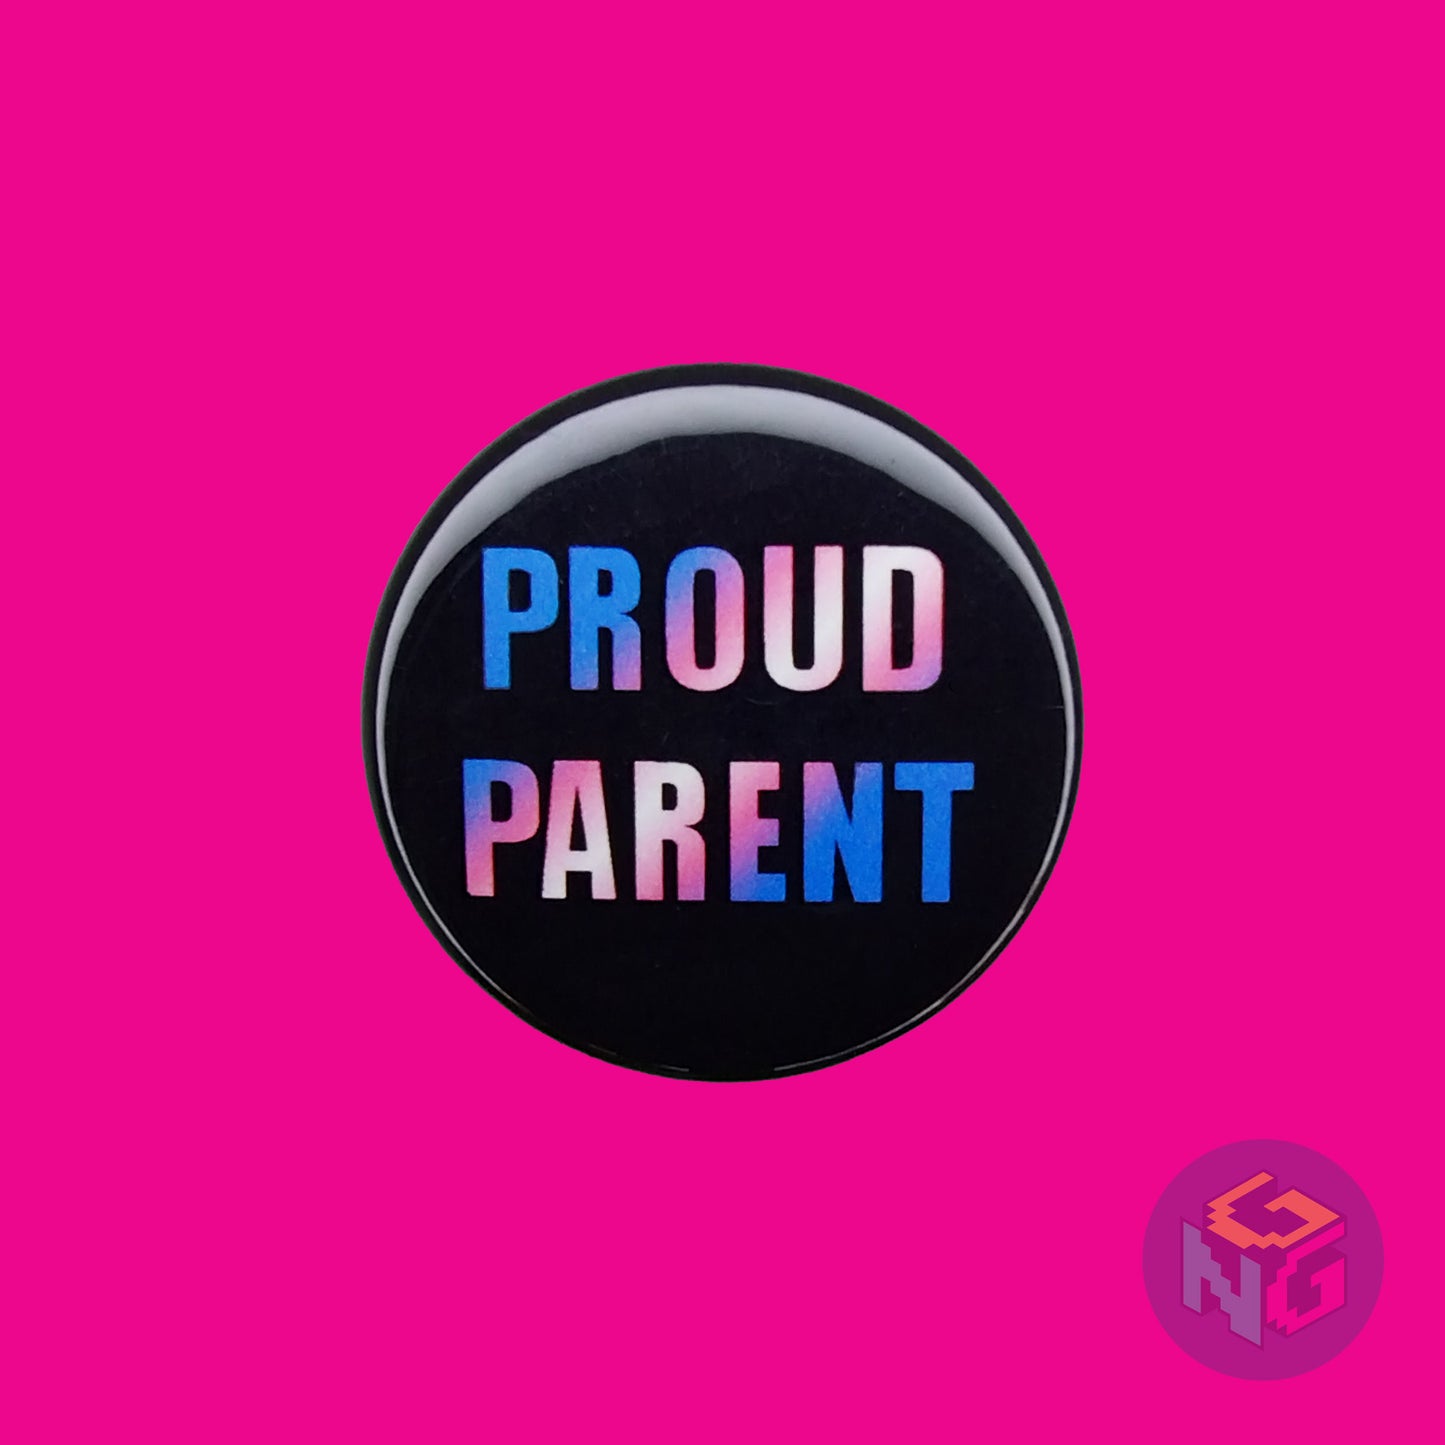 round transgender proud parent ally button on a pink background. The design features the words "proud parent" in transgender colors with a black background